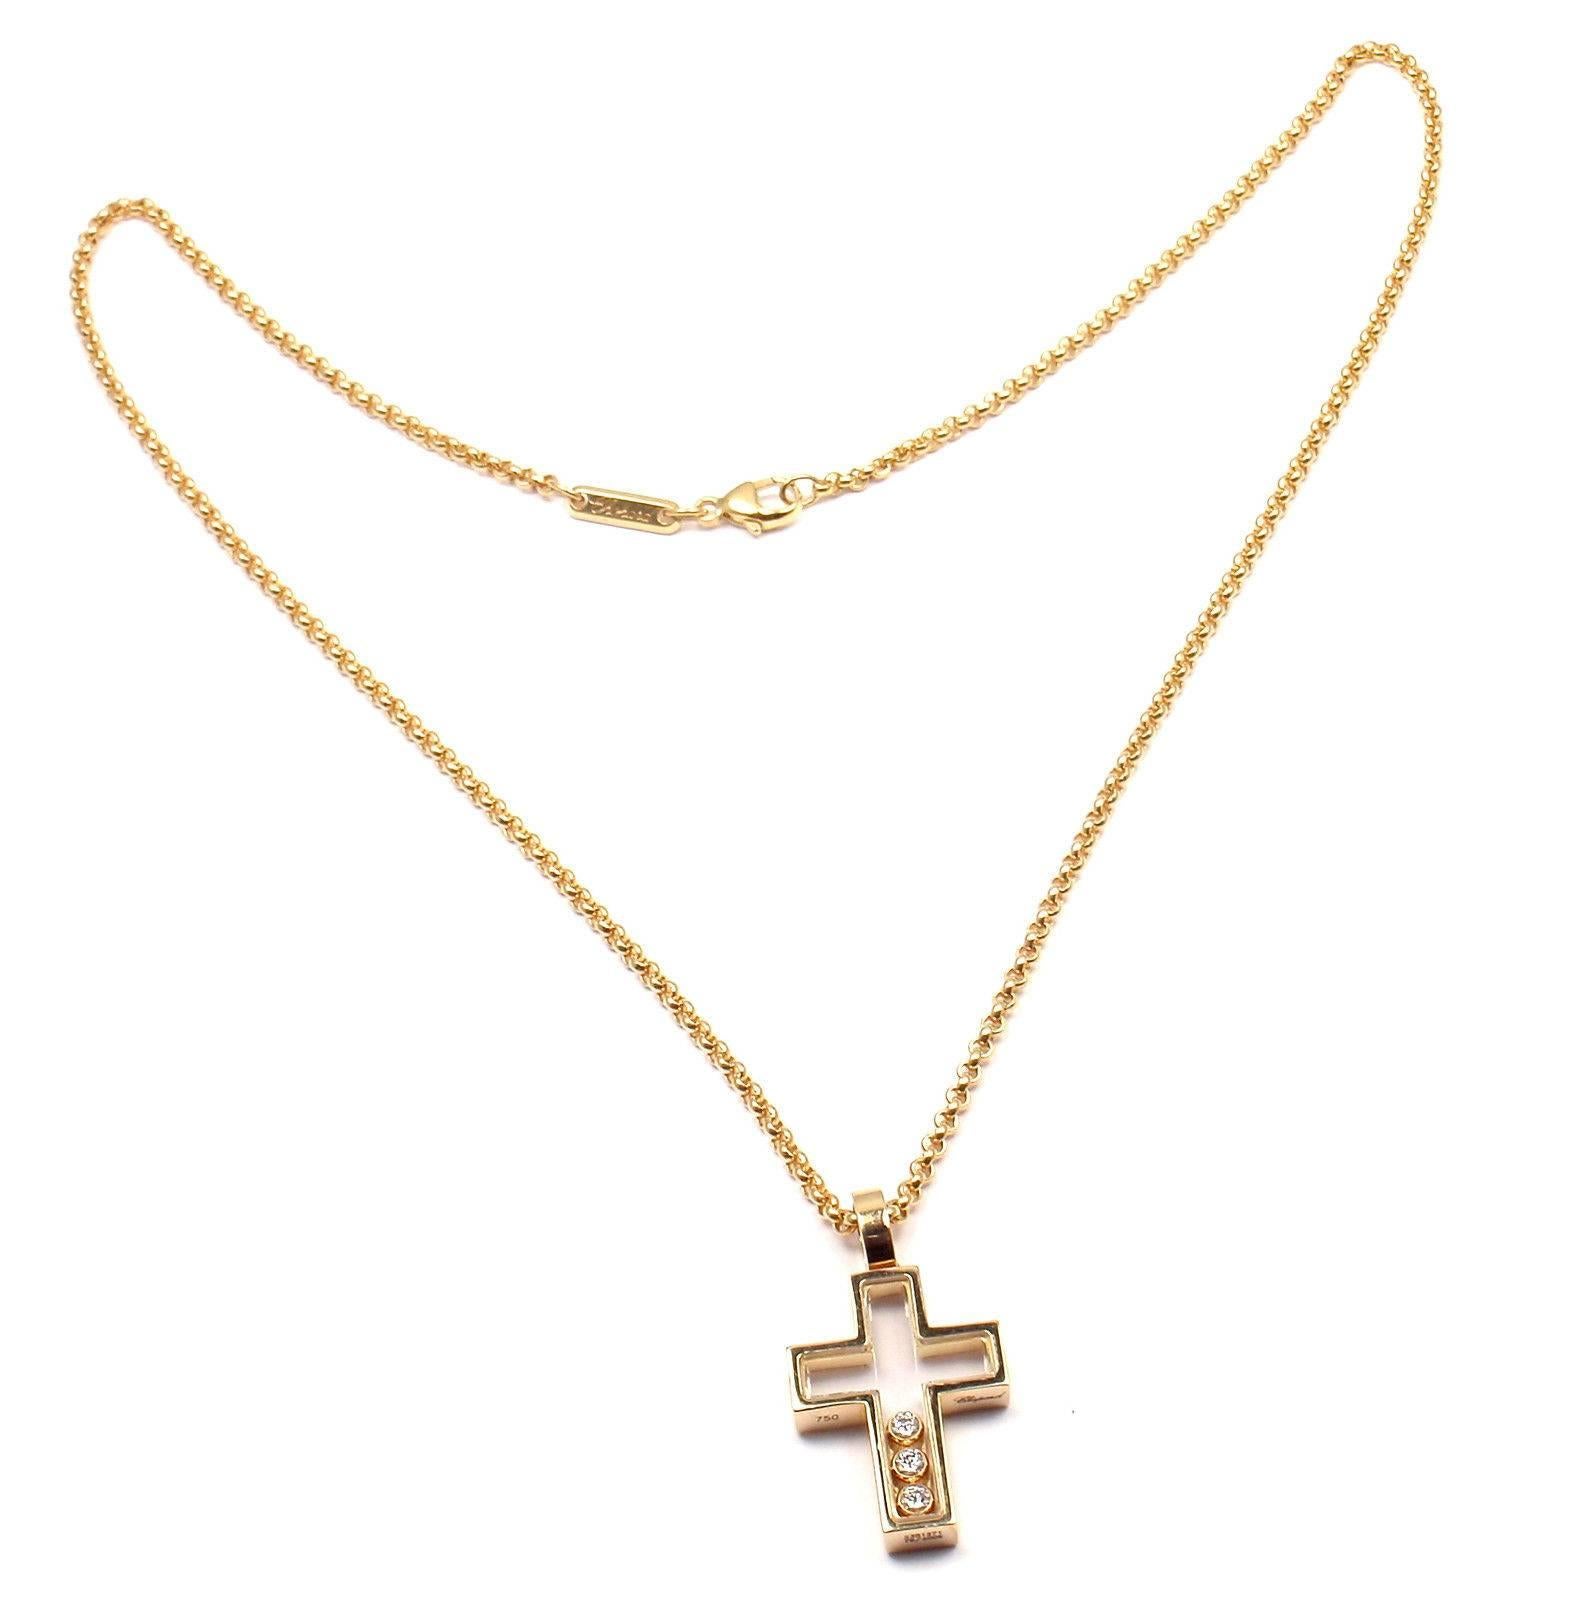 18k Yellow Gold Diamond Happy Diamonds Cross Pendant Necklace by Chopard.  
With 3 Round Brilliant Cut Diamonds VS1 total weight approx. .17ct

Details:  
Length: 16.5